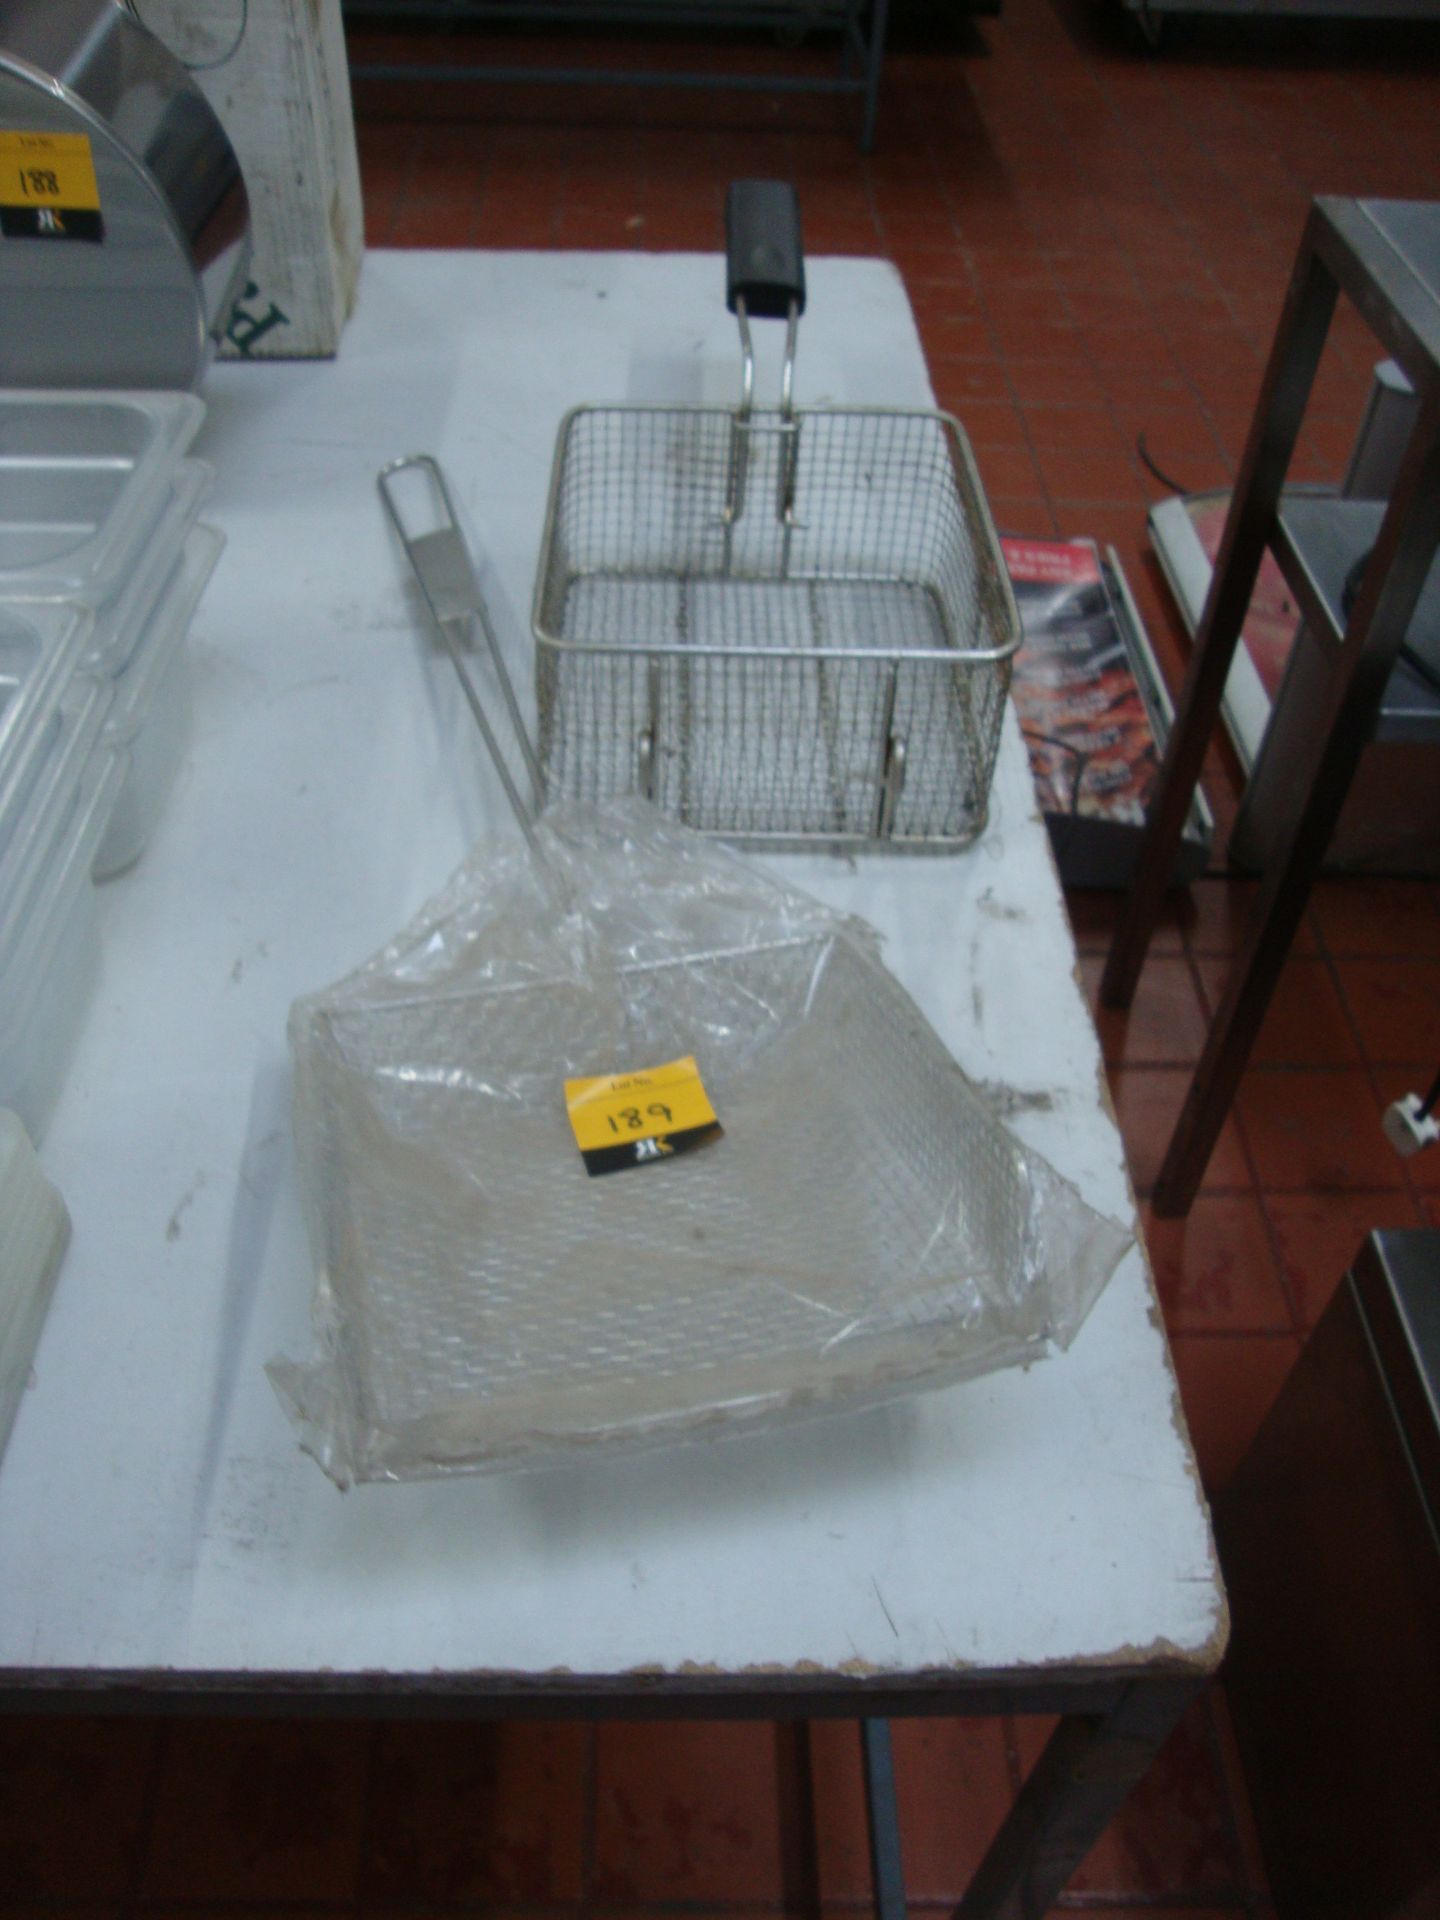 Fryer basket and fryer long handled implement IMPORTANT: Please remember goods successfully bid upon - Image 2 of 2